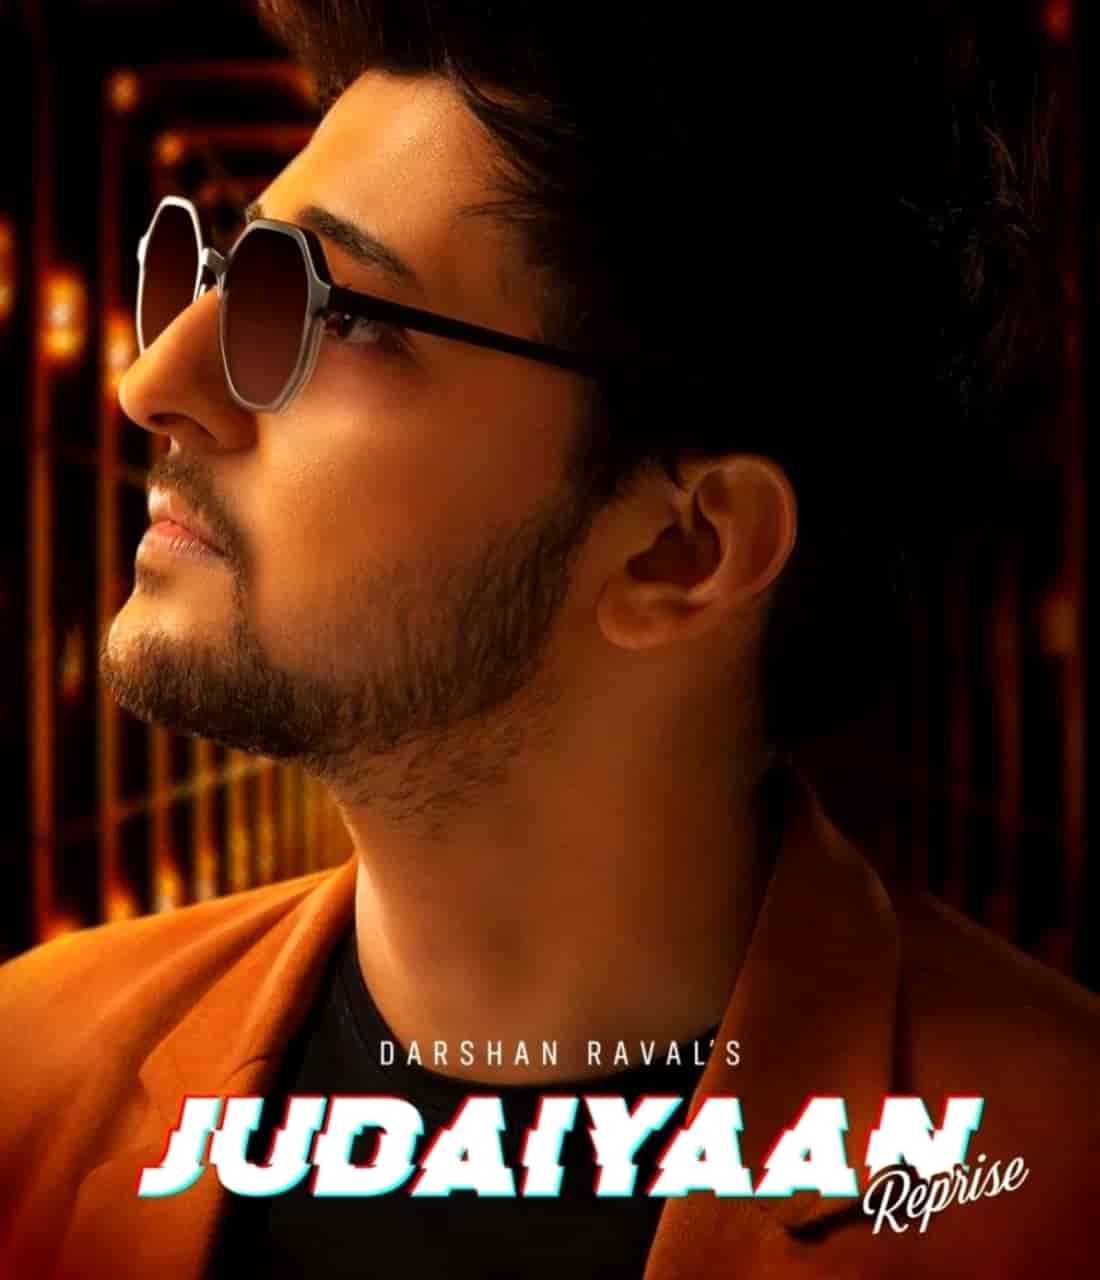 Now Judaiyaan album team ready to release it's title track Judaiyaan Reprise version sung by Darshan Raval.